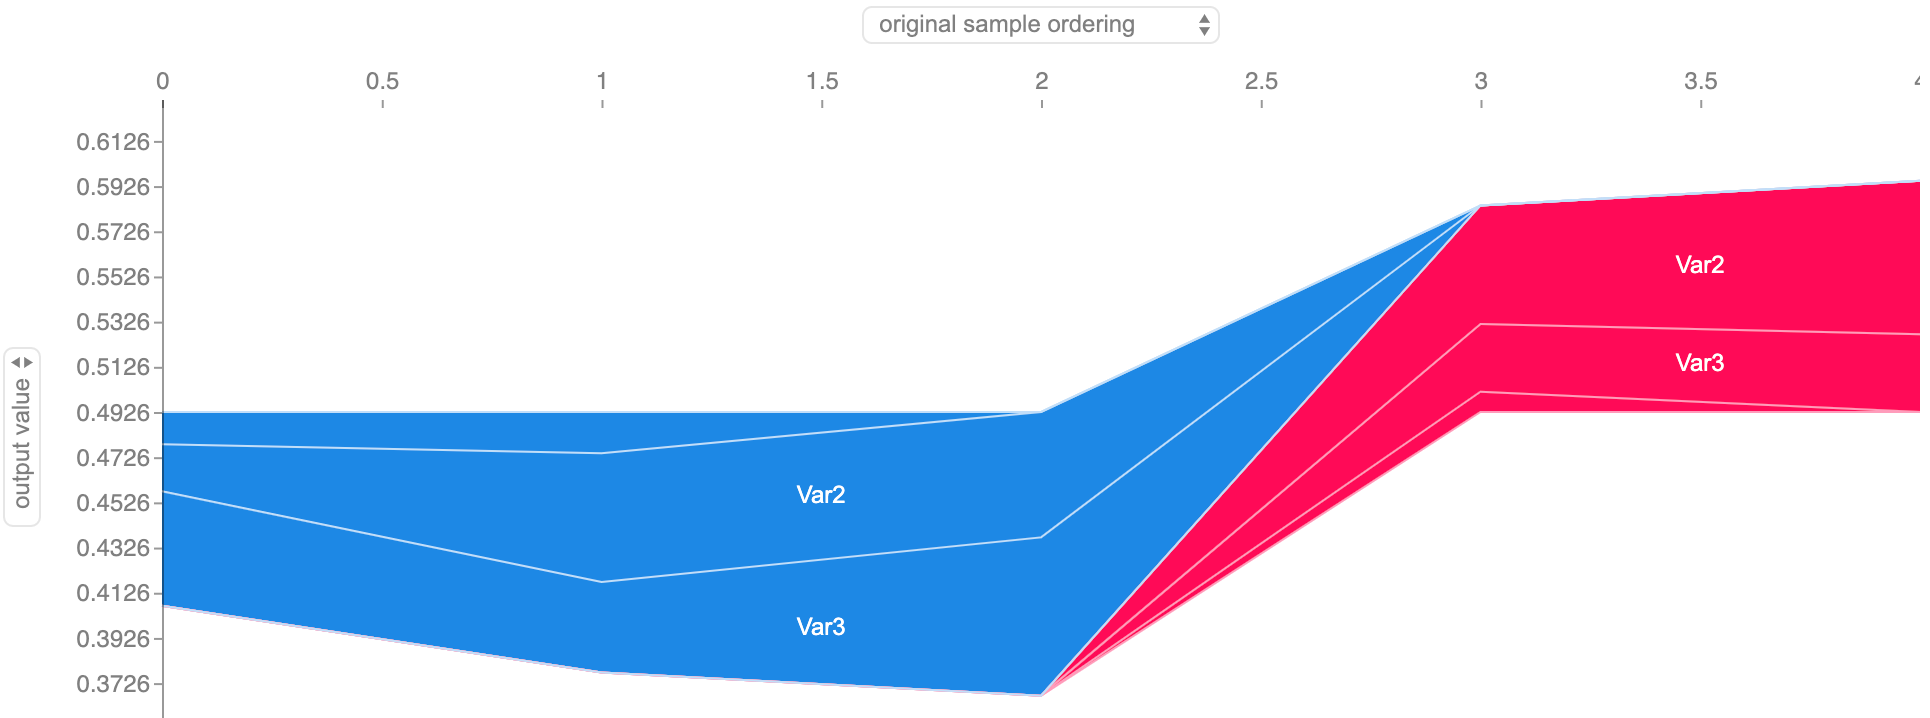 Feature importance along the dummy dataset subject 0’s time series. The border between the red shade (output increasing features) and the blue shade (output decreasing features) represents the model’s output for each timestamp.